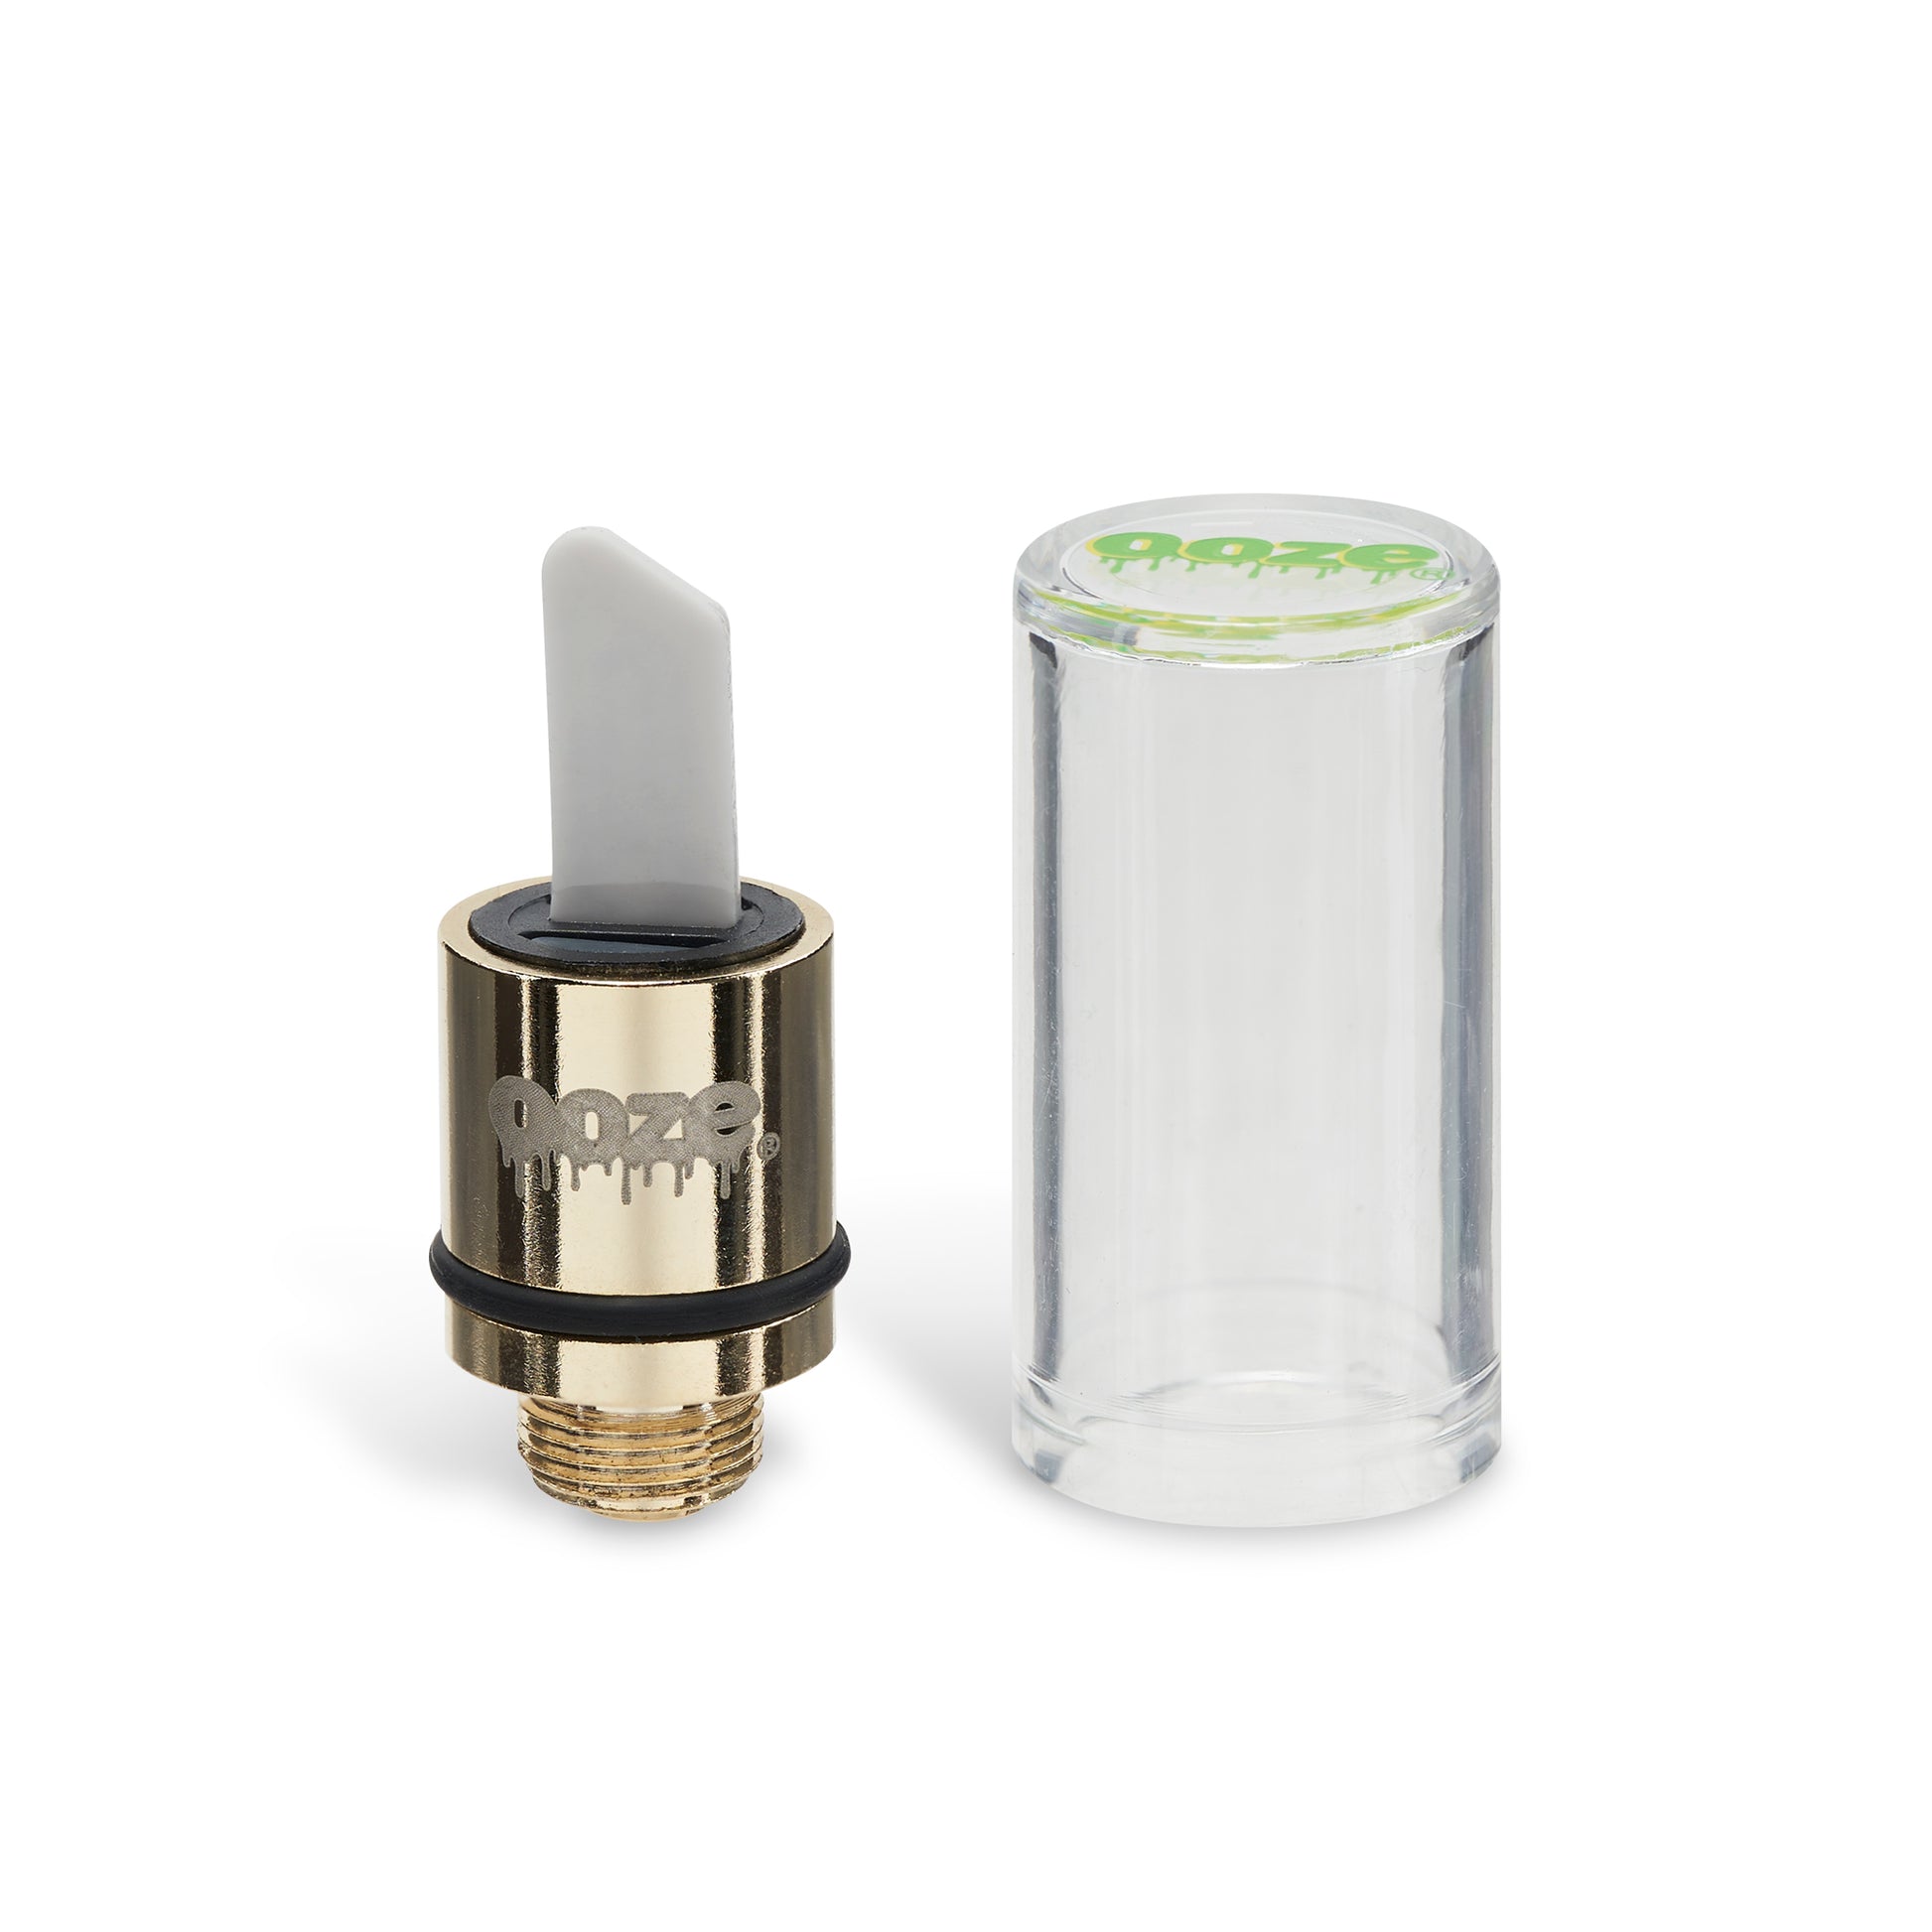 The gold Ooze Hot Knife attachment stands upright next to the clear plastic cap